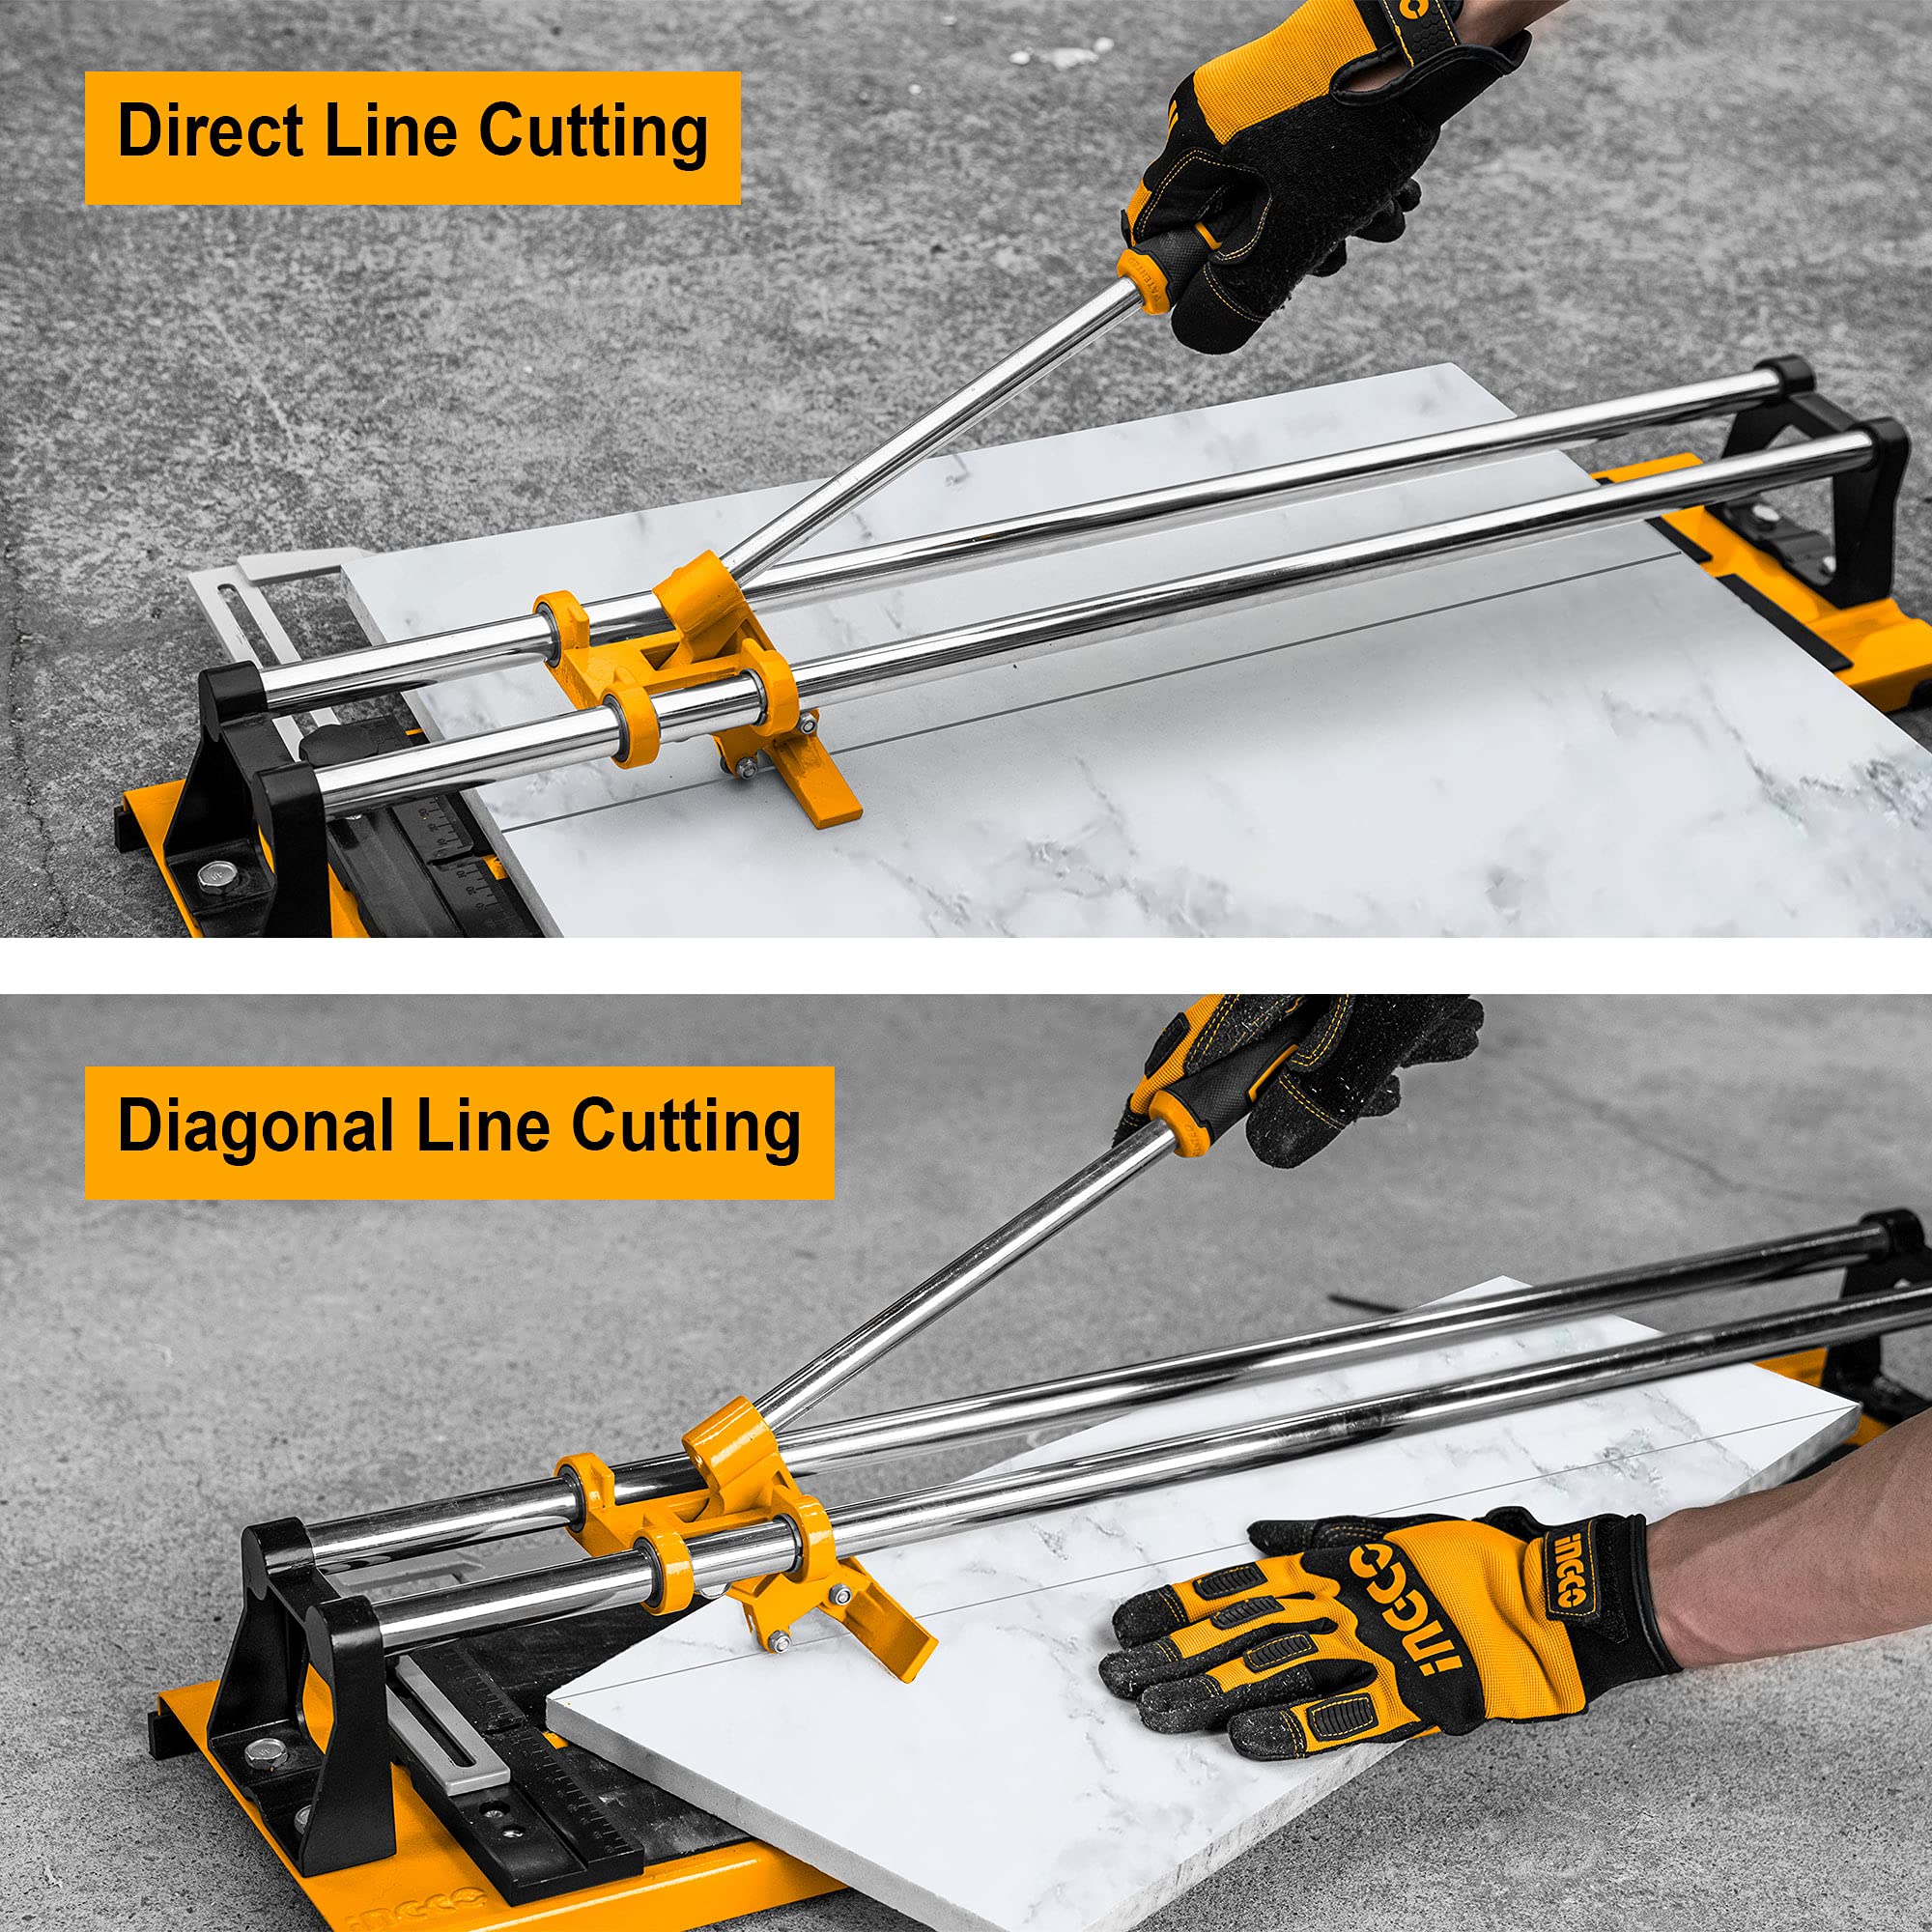 Ingco 600mm Tile Cutter - HTC04600 | Supply Master | Accra, Ghana Marble & Tile Cutter Buy Tools hardware Building materials